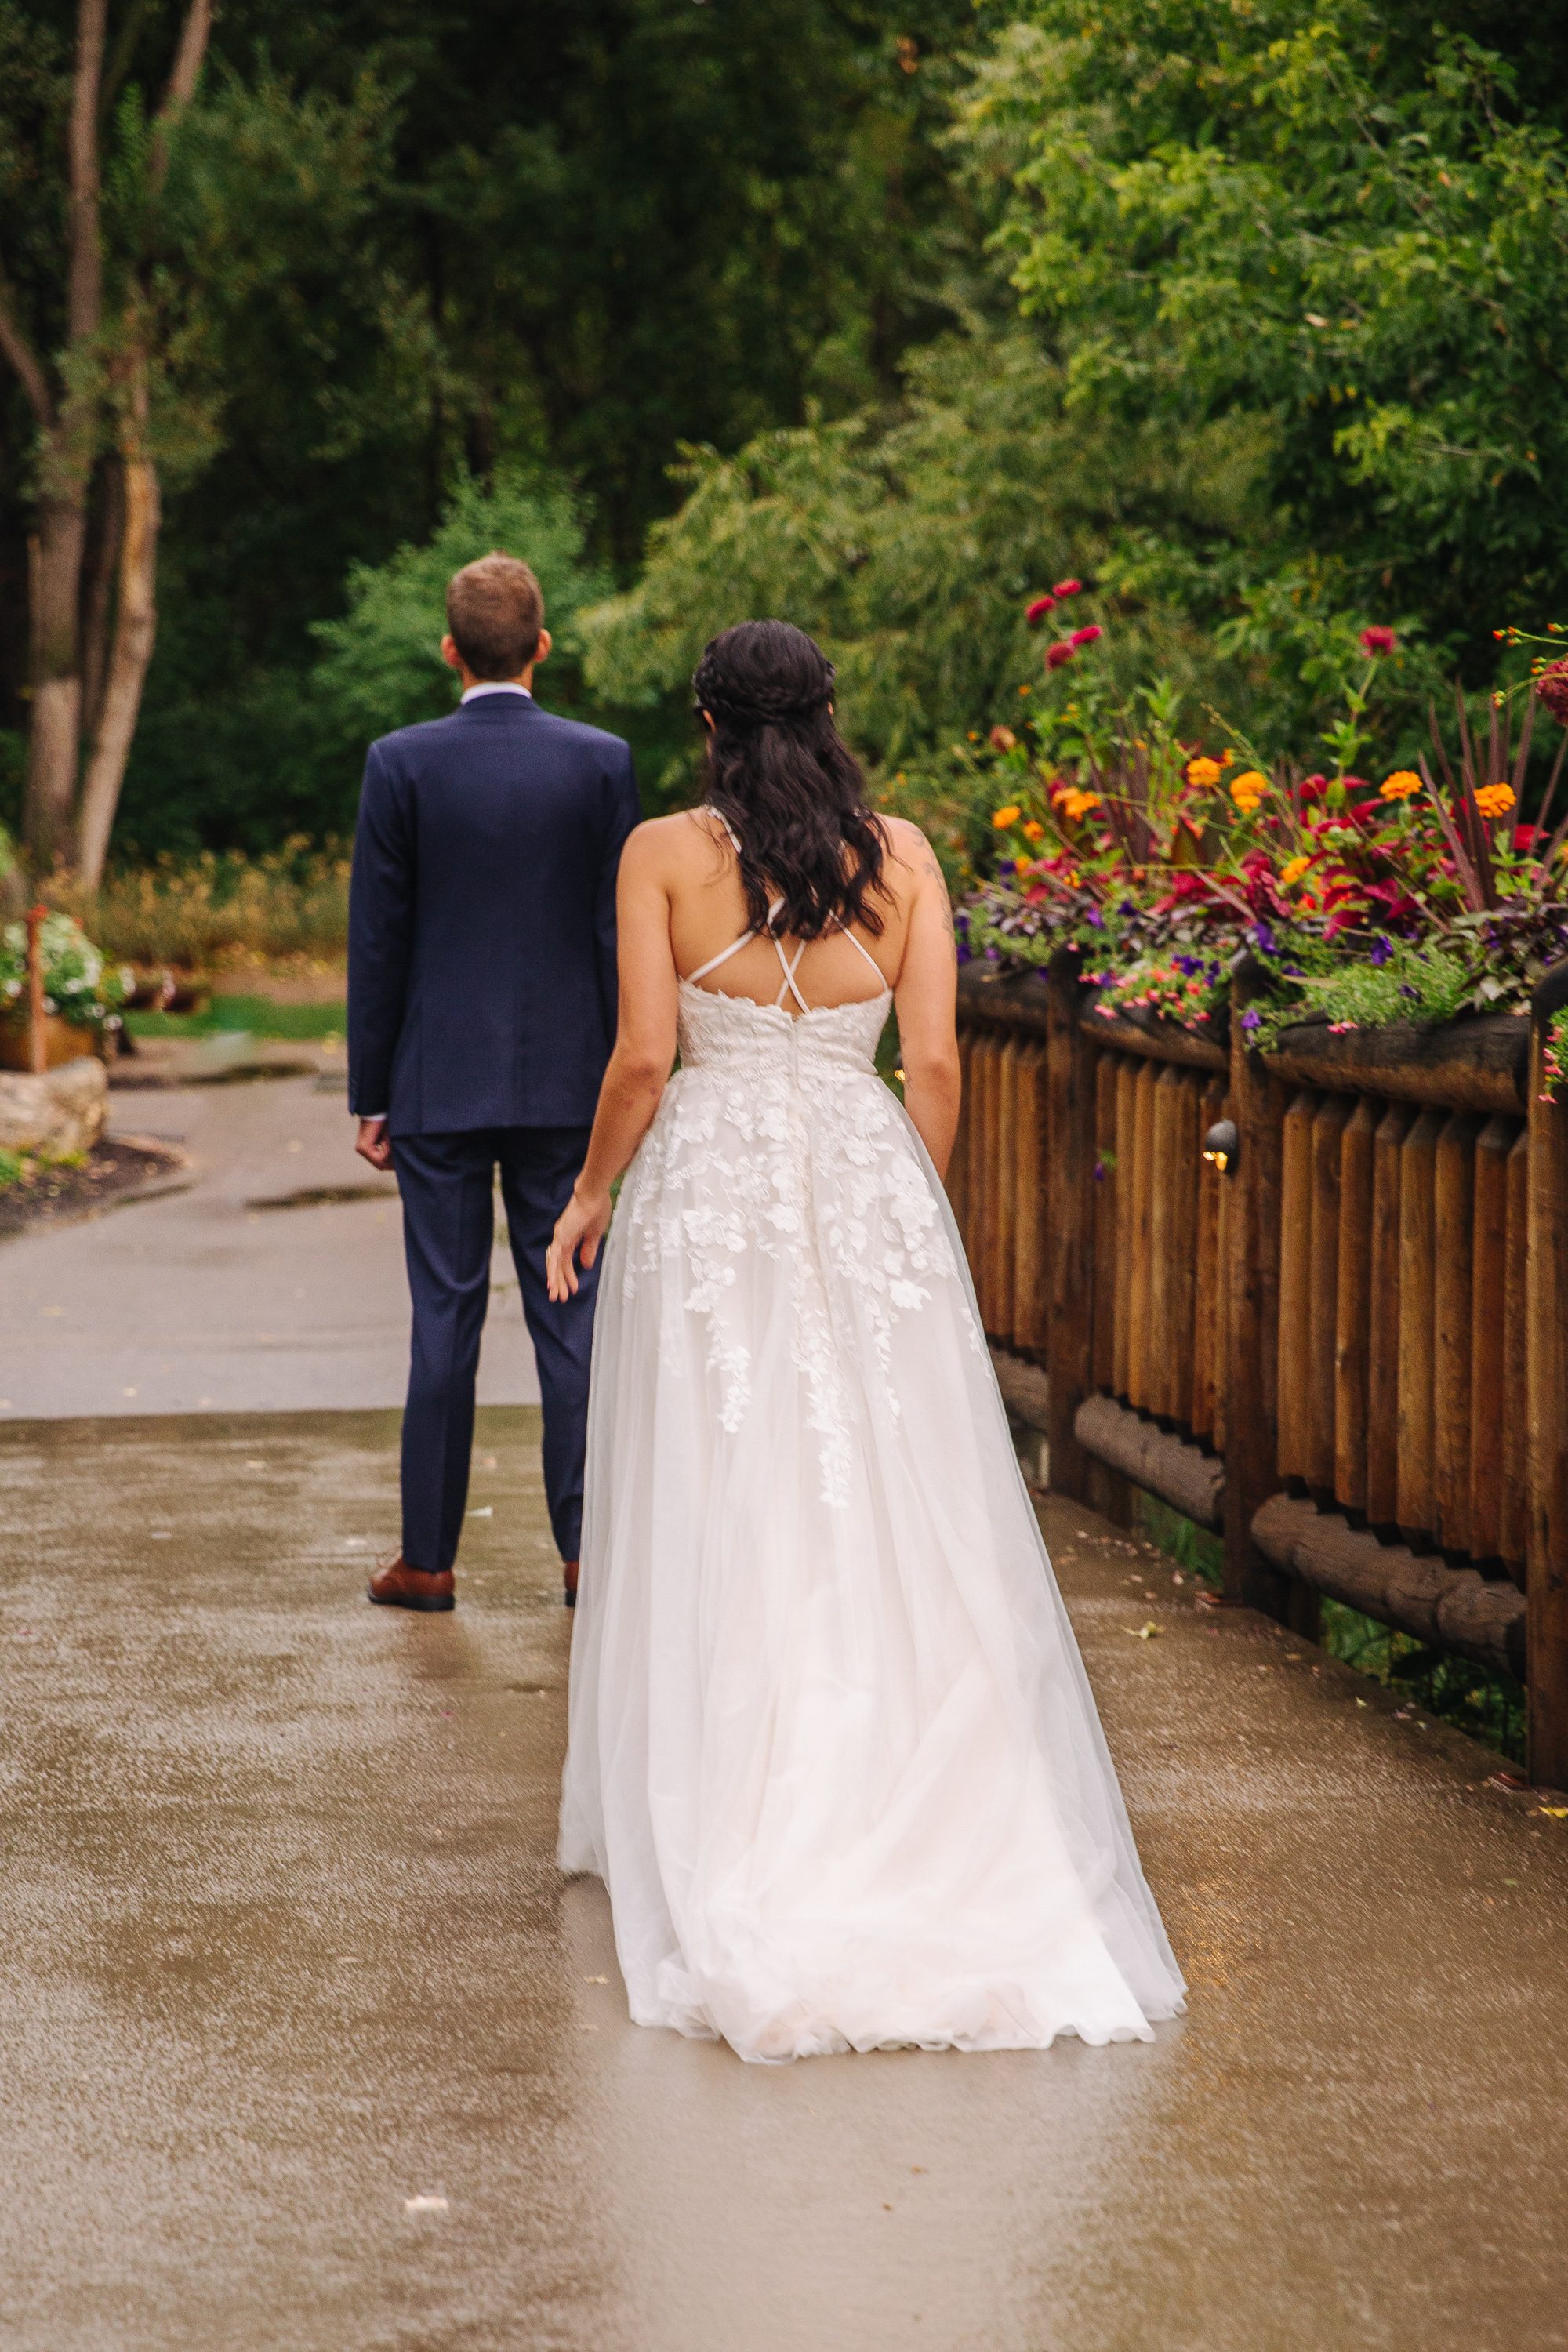 wedding first look, first look with bride and groom, colorado wedding photographer, wedding moments, wedding first looks, chatfield farm wedding, colorado wedding venue, rainy wedding, garden wedding, colorado garden wedding, chatfield farm botanic gardens denver